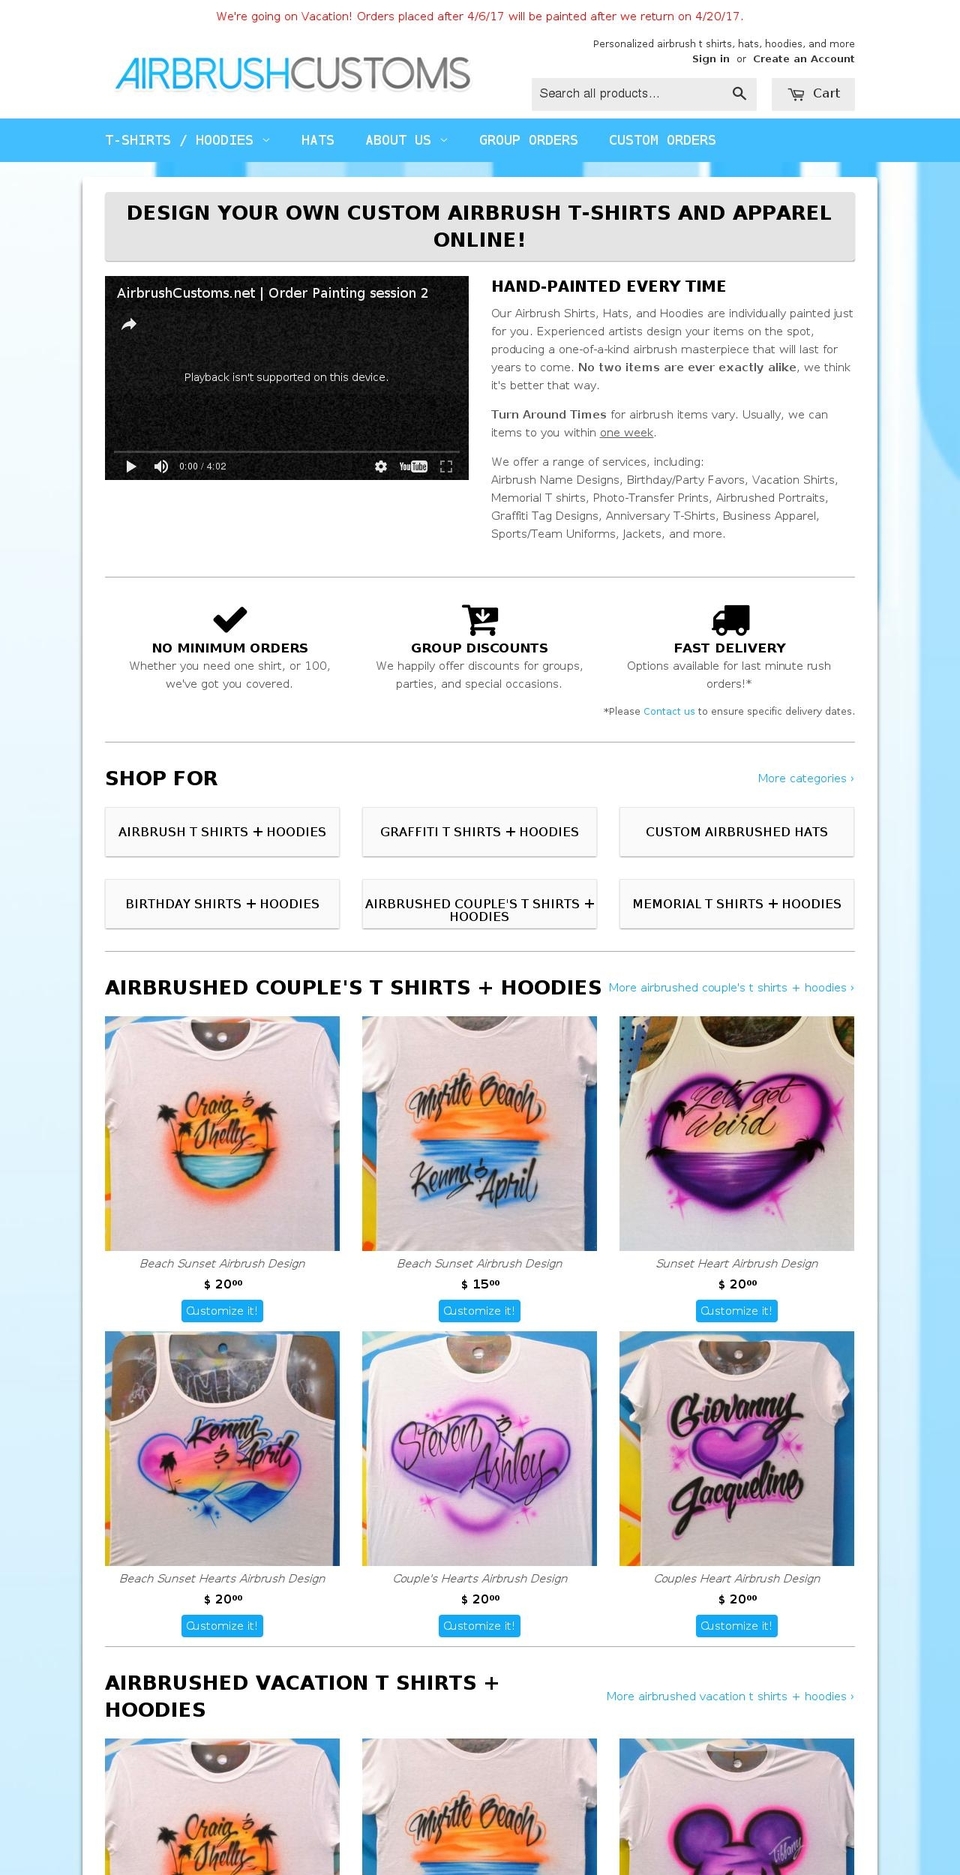 Ride Shopify theme site example airbrushcustoms.net